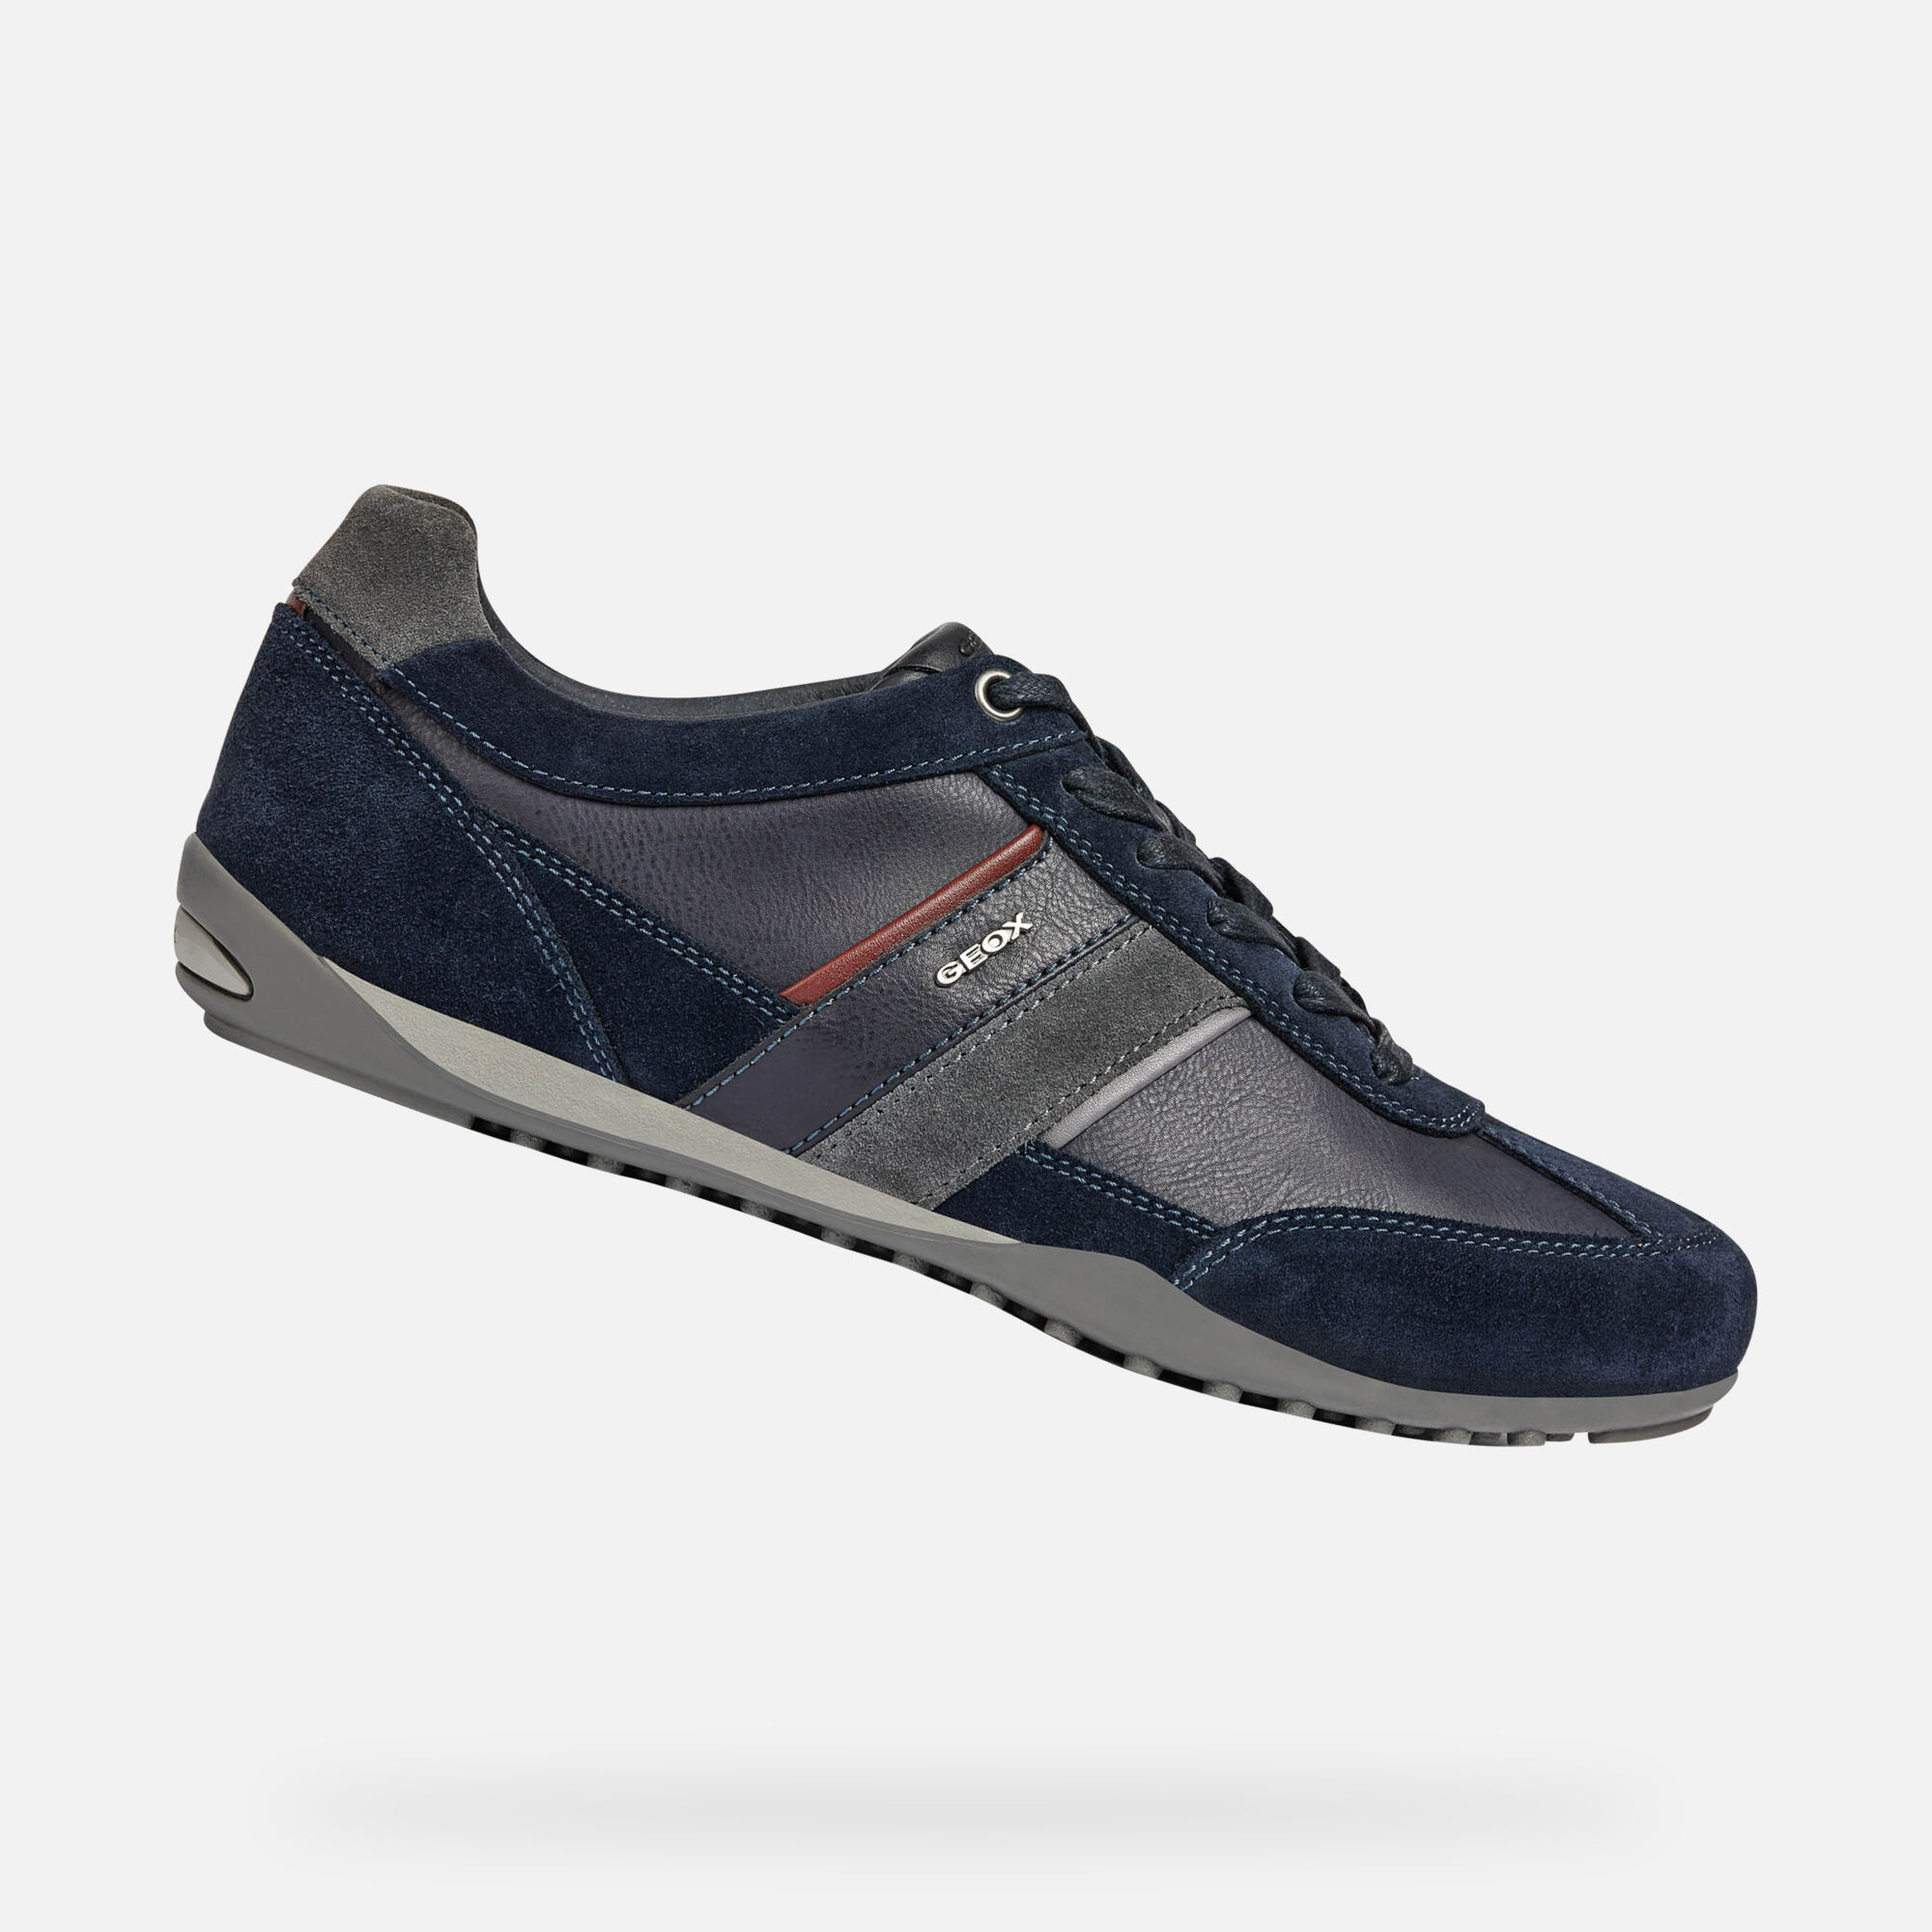 Geox WELLS Sneakers Blu navy Uomo | Geox® Autunno/Inverno 2020